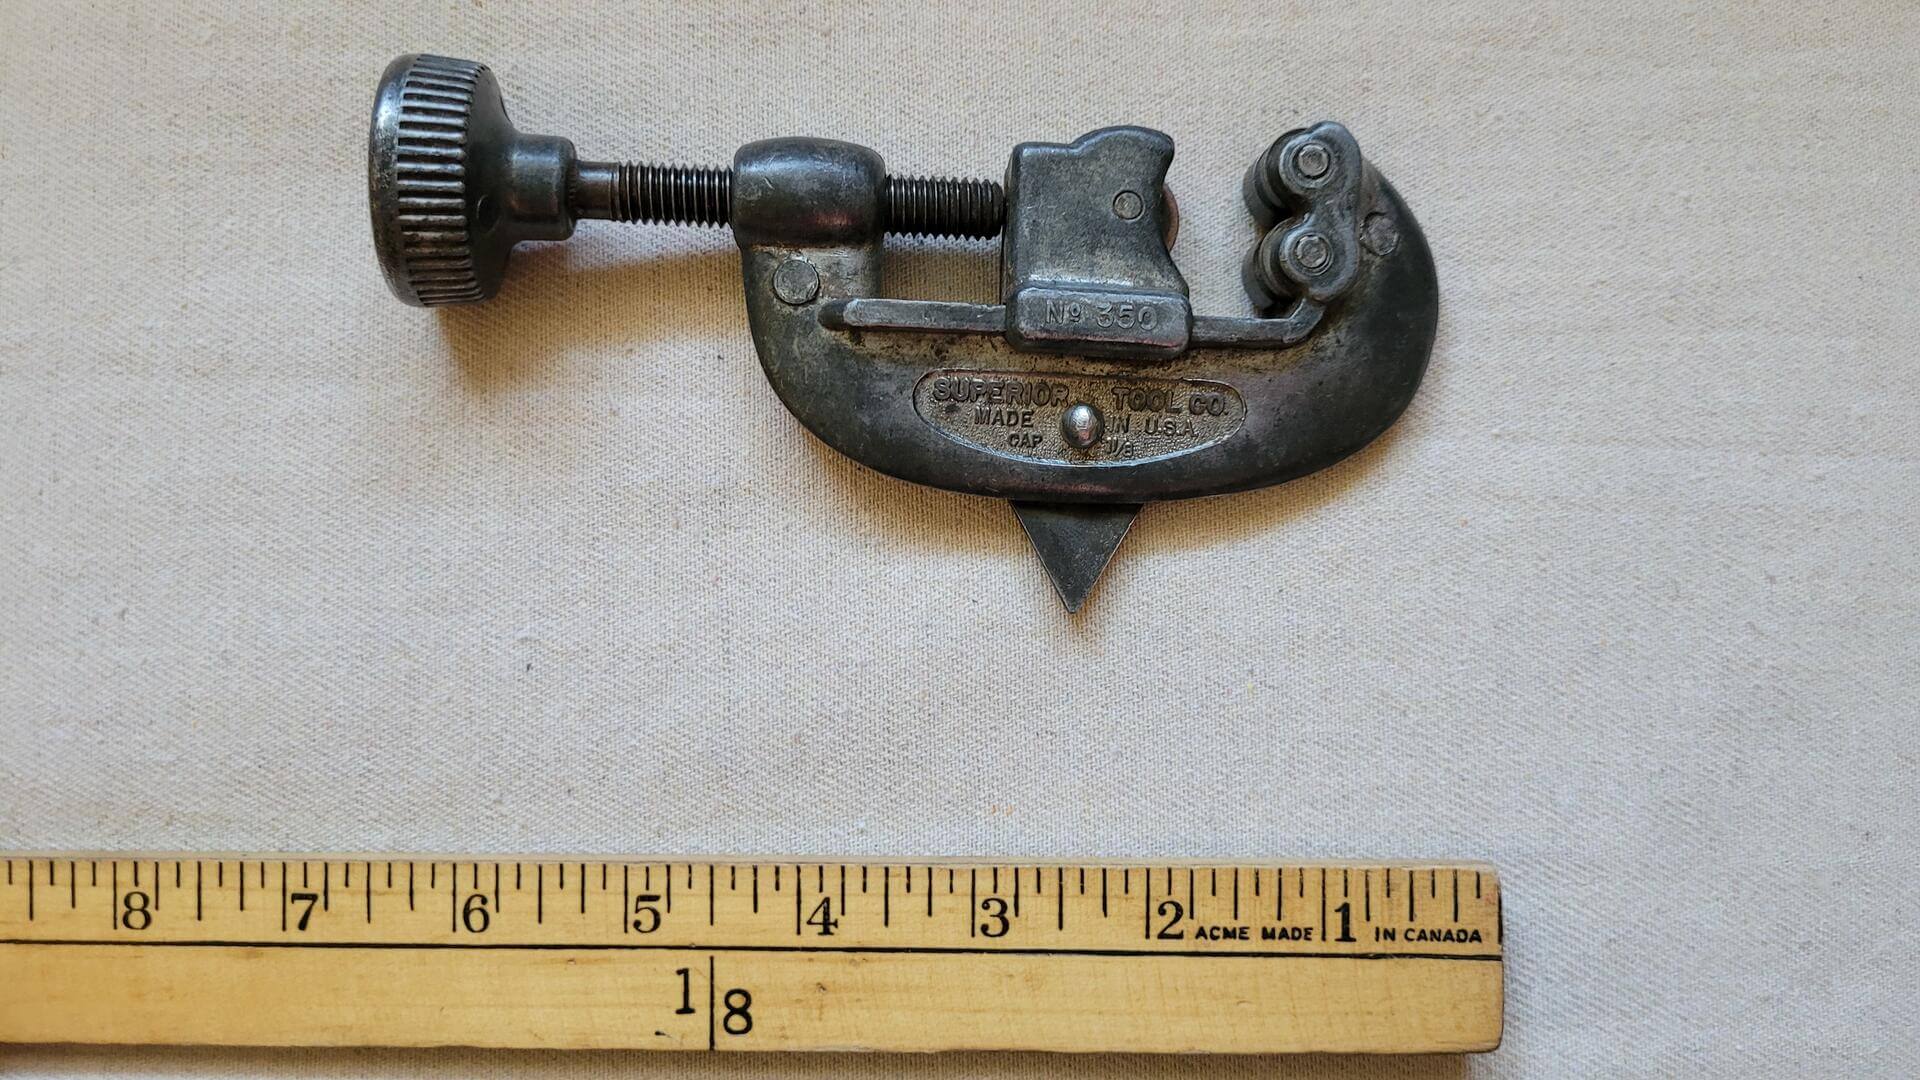 Vintage Superior Tool Co No. 350 Screw-Feed Tubing Cutter - Antique made in USA collectible plumbing tools